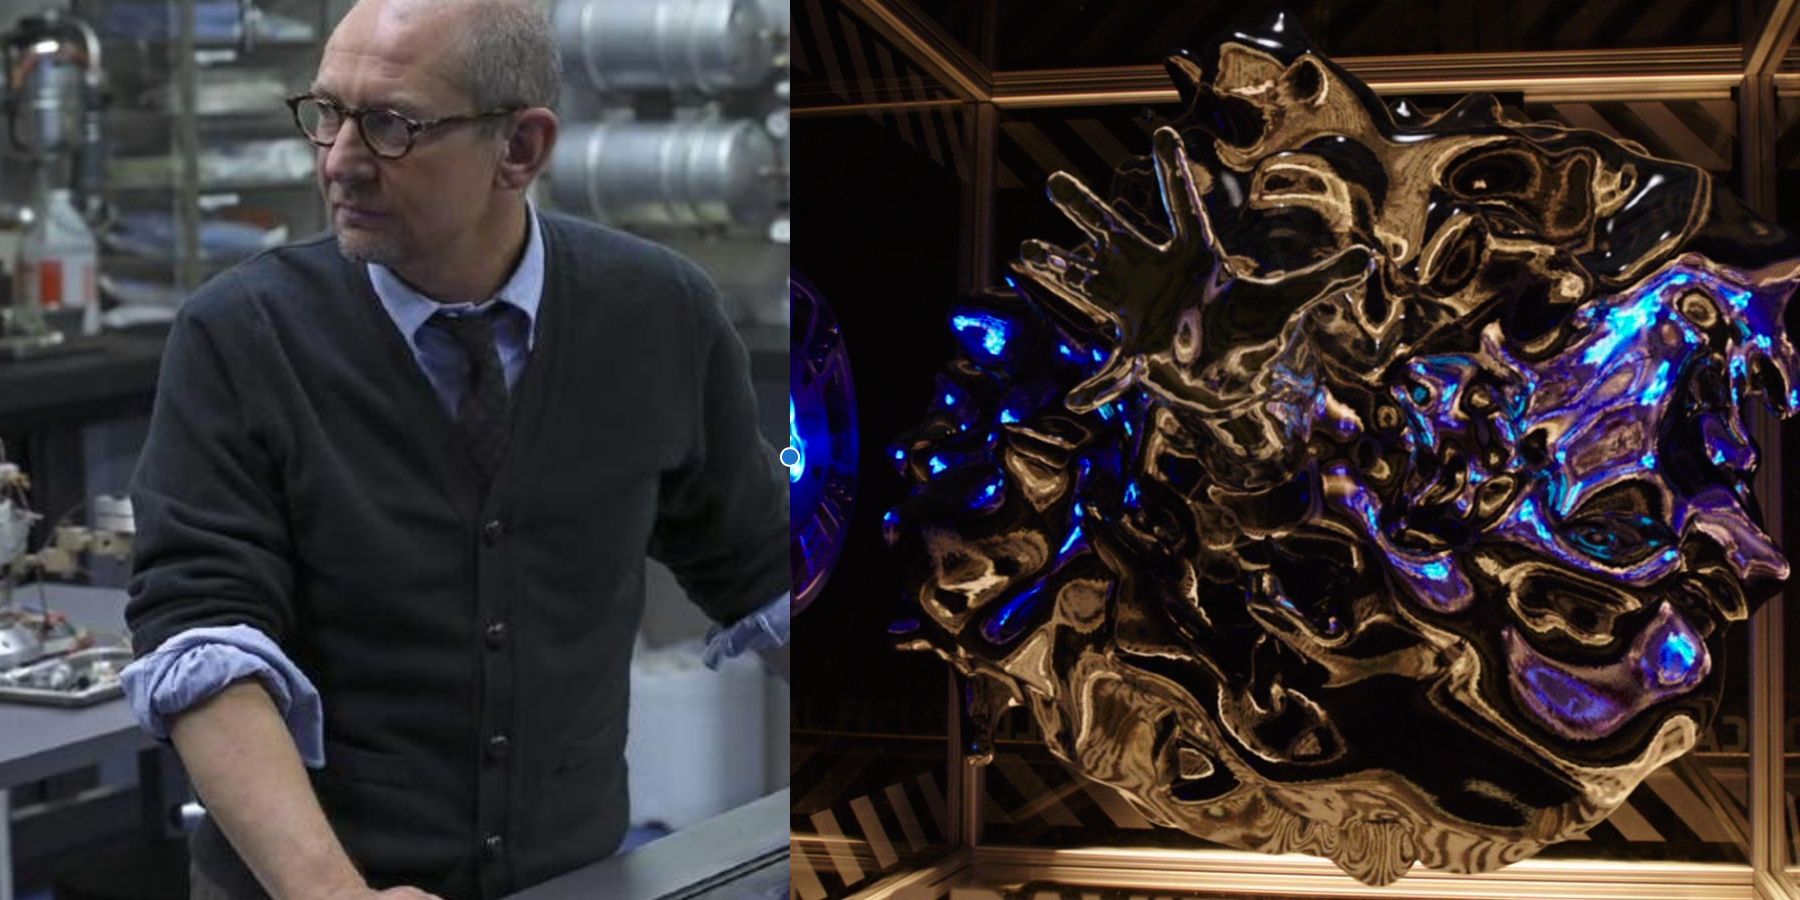 ian hart as franklin hall in agents of shield